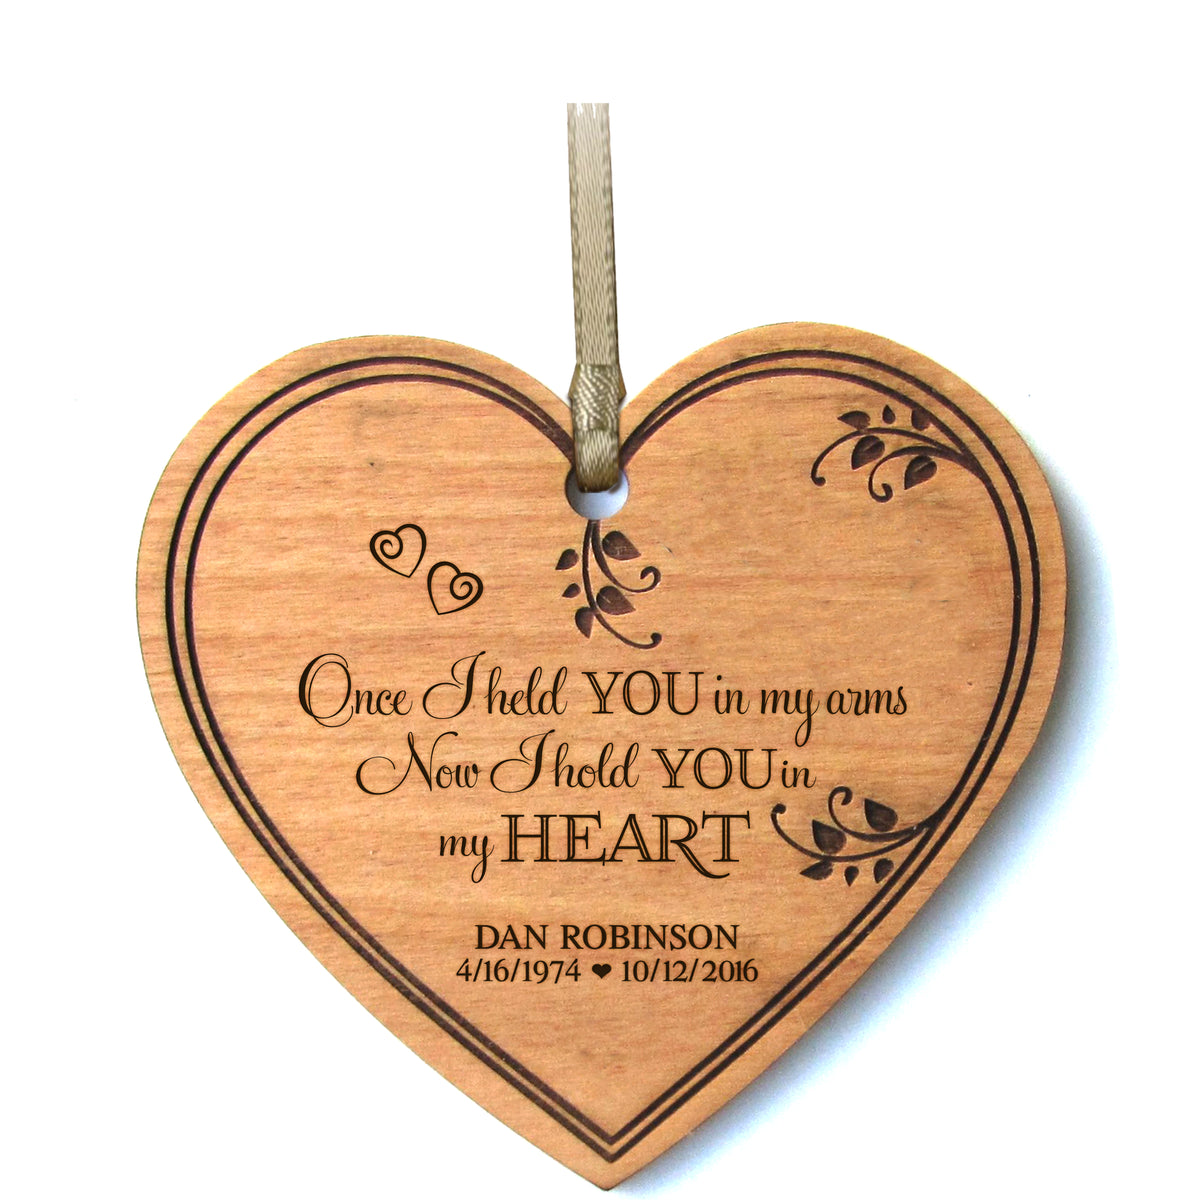 LifeSong Milestones Personalized Memorial Heart Ornament Once I Held You Bereavement Keepsake Ornament Loss of Loved One Sympathy Home Decor - 3.75” x 4” x 0.125”